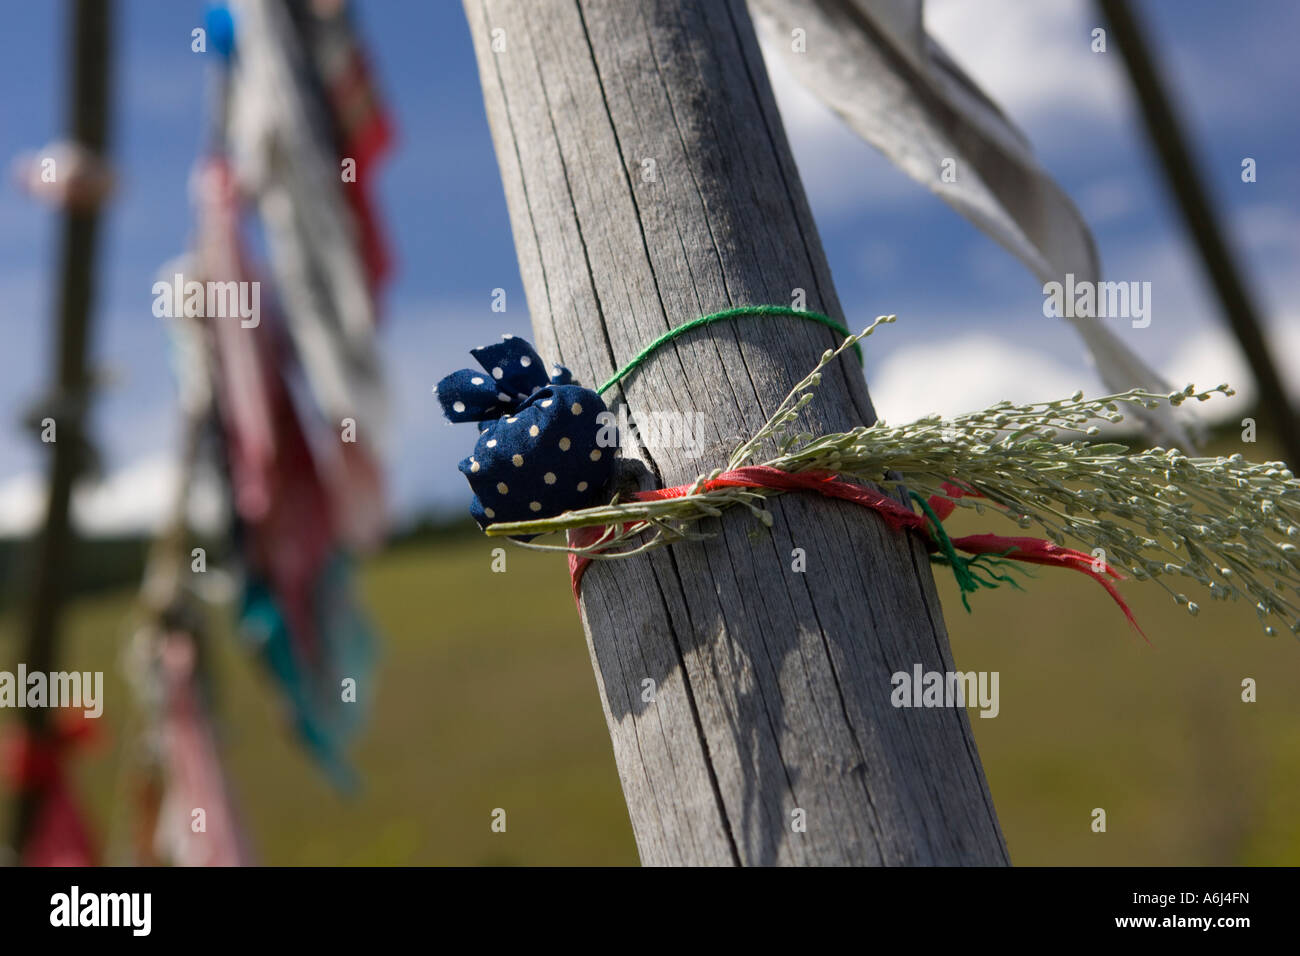 Offerings on Chief Joseph tipi at Big Hole National Battlefield Stock Photo